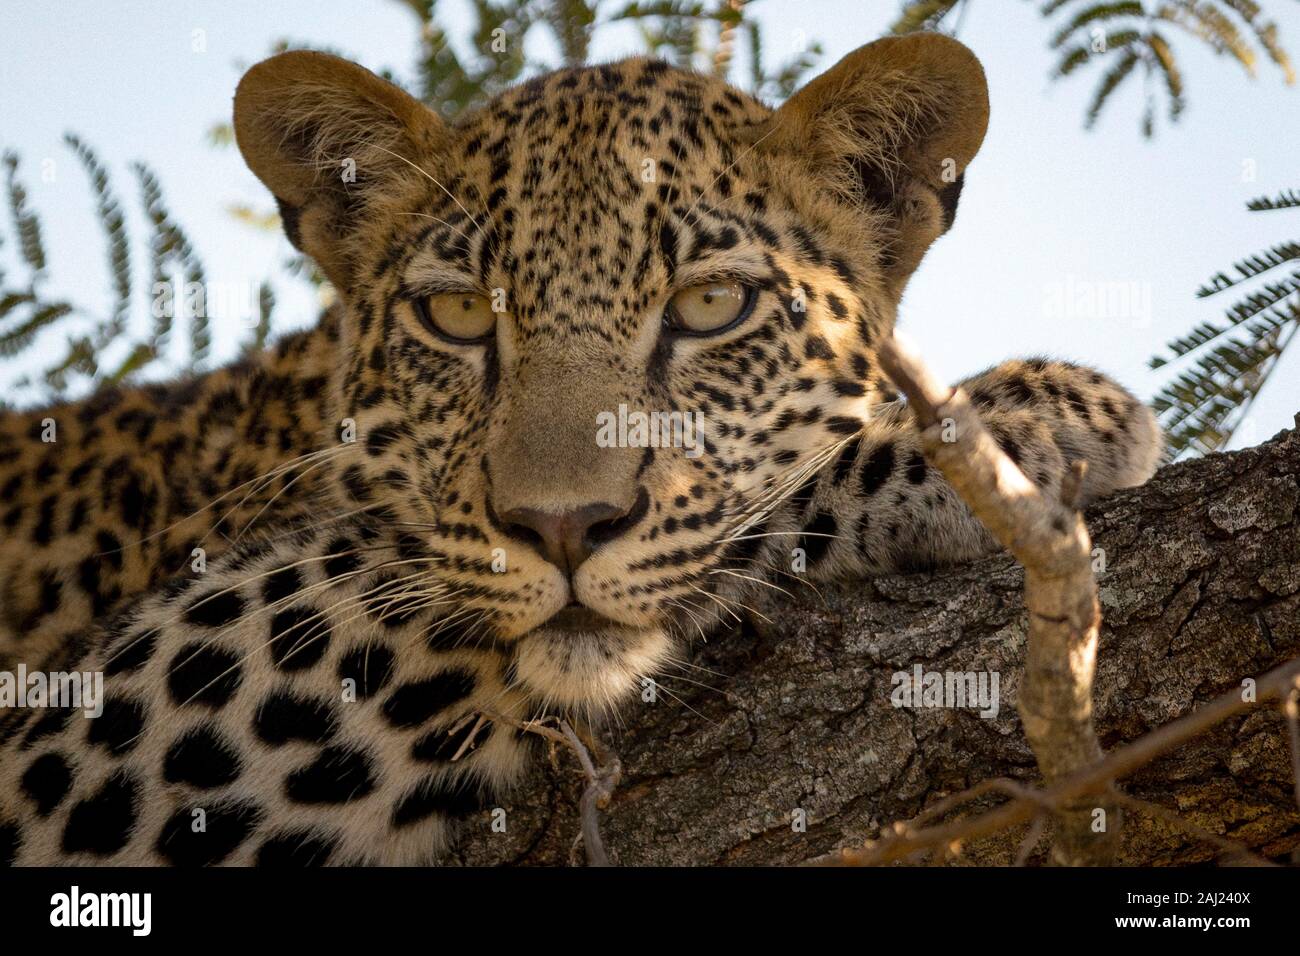 Leopard in tree (Panthera pardus), Kruger National Park, South Africa, Africa Stock Photo